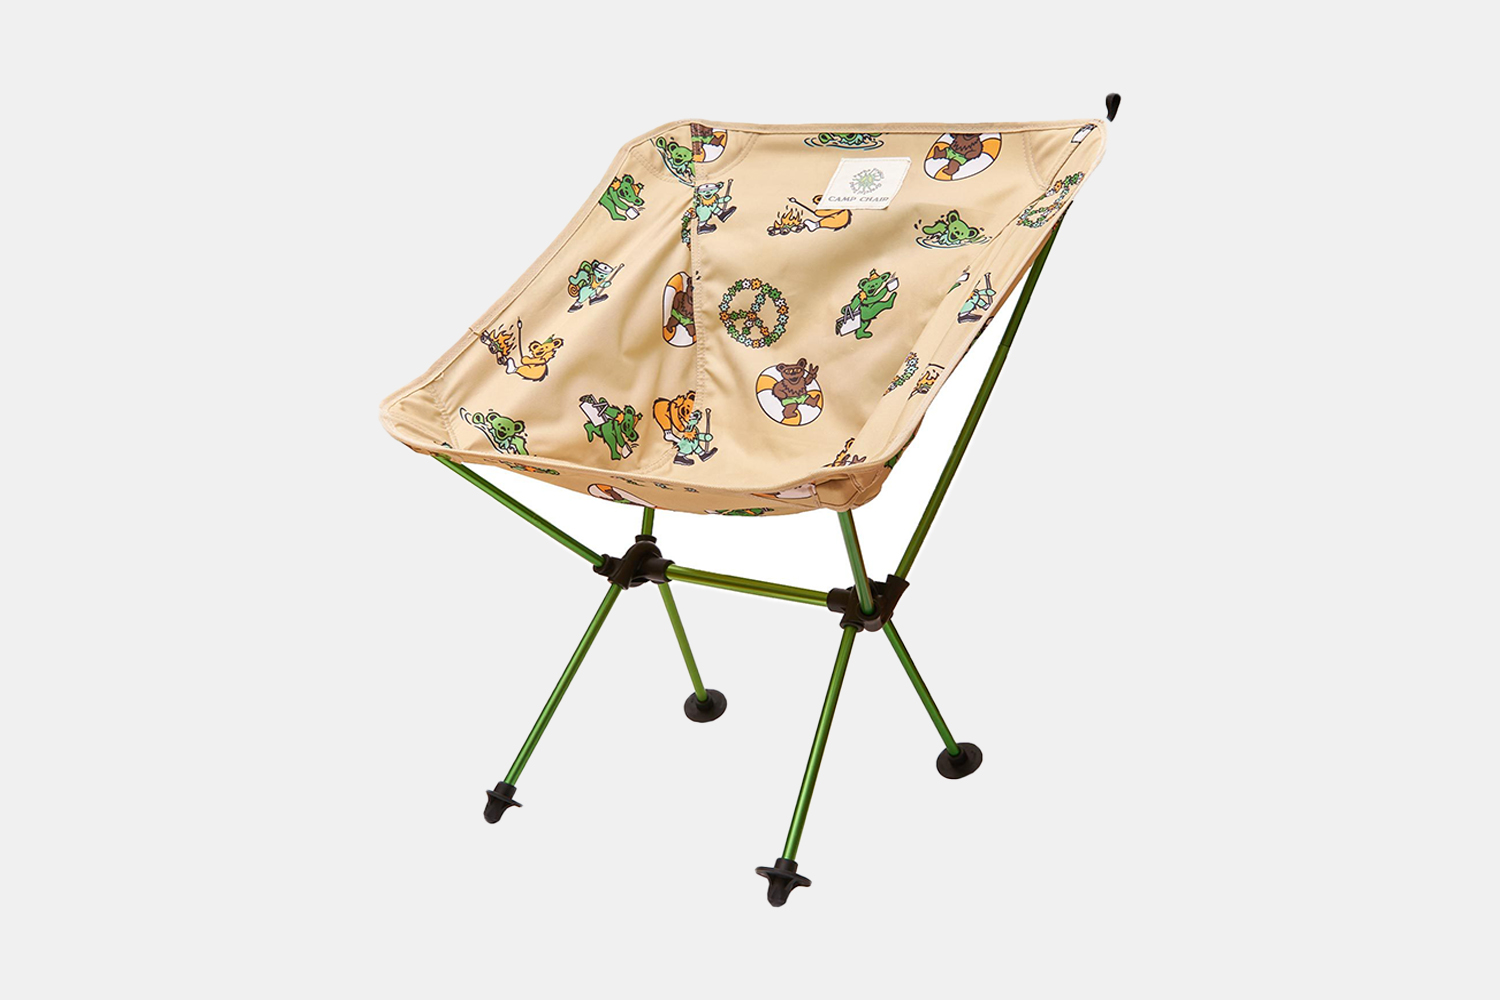 a camping chair with the Grateful Dead dancing bars iconography